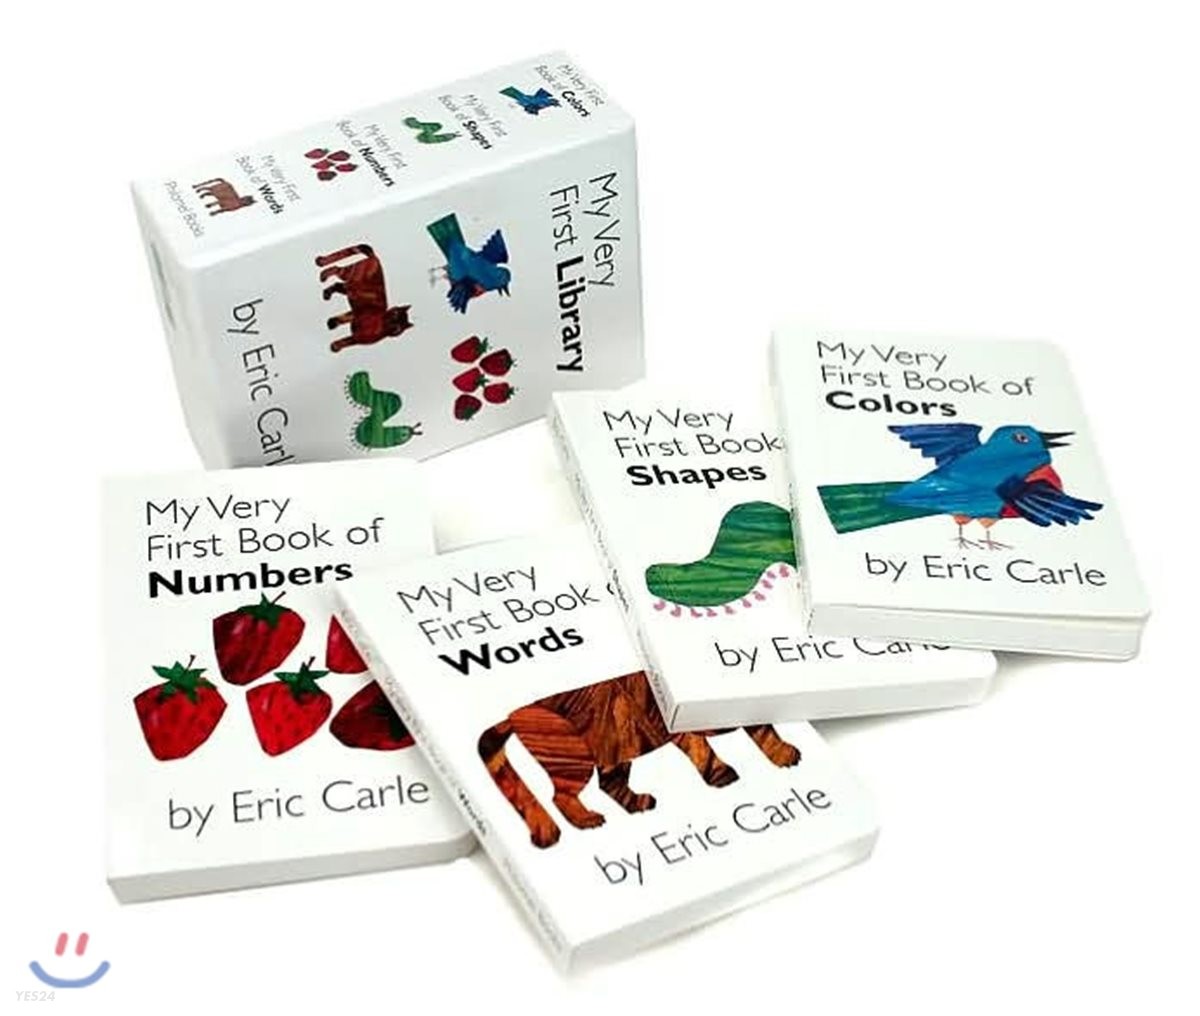 My Very First Library 우리 아이 첫 영어책 4종 박스 세트 (색깔 / 모양 / 숫자 / 단어) (My Very First Book of Colors / Shapes / Numbers / Words)